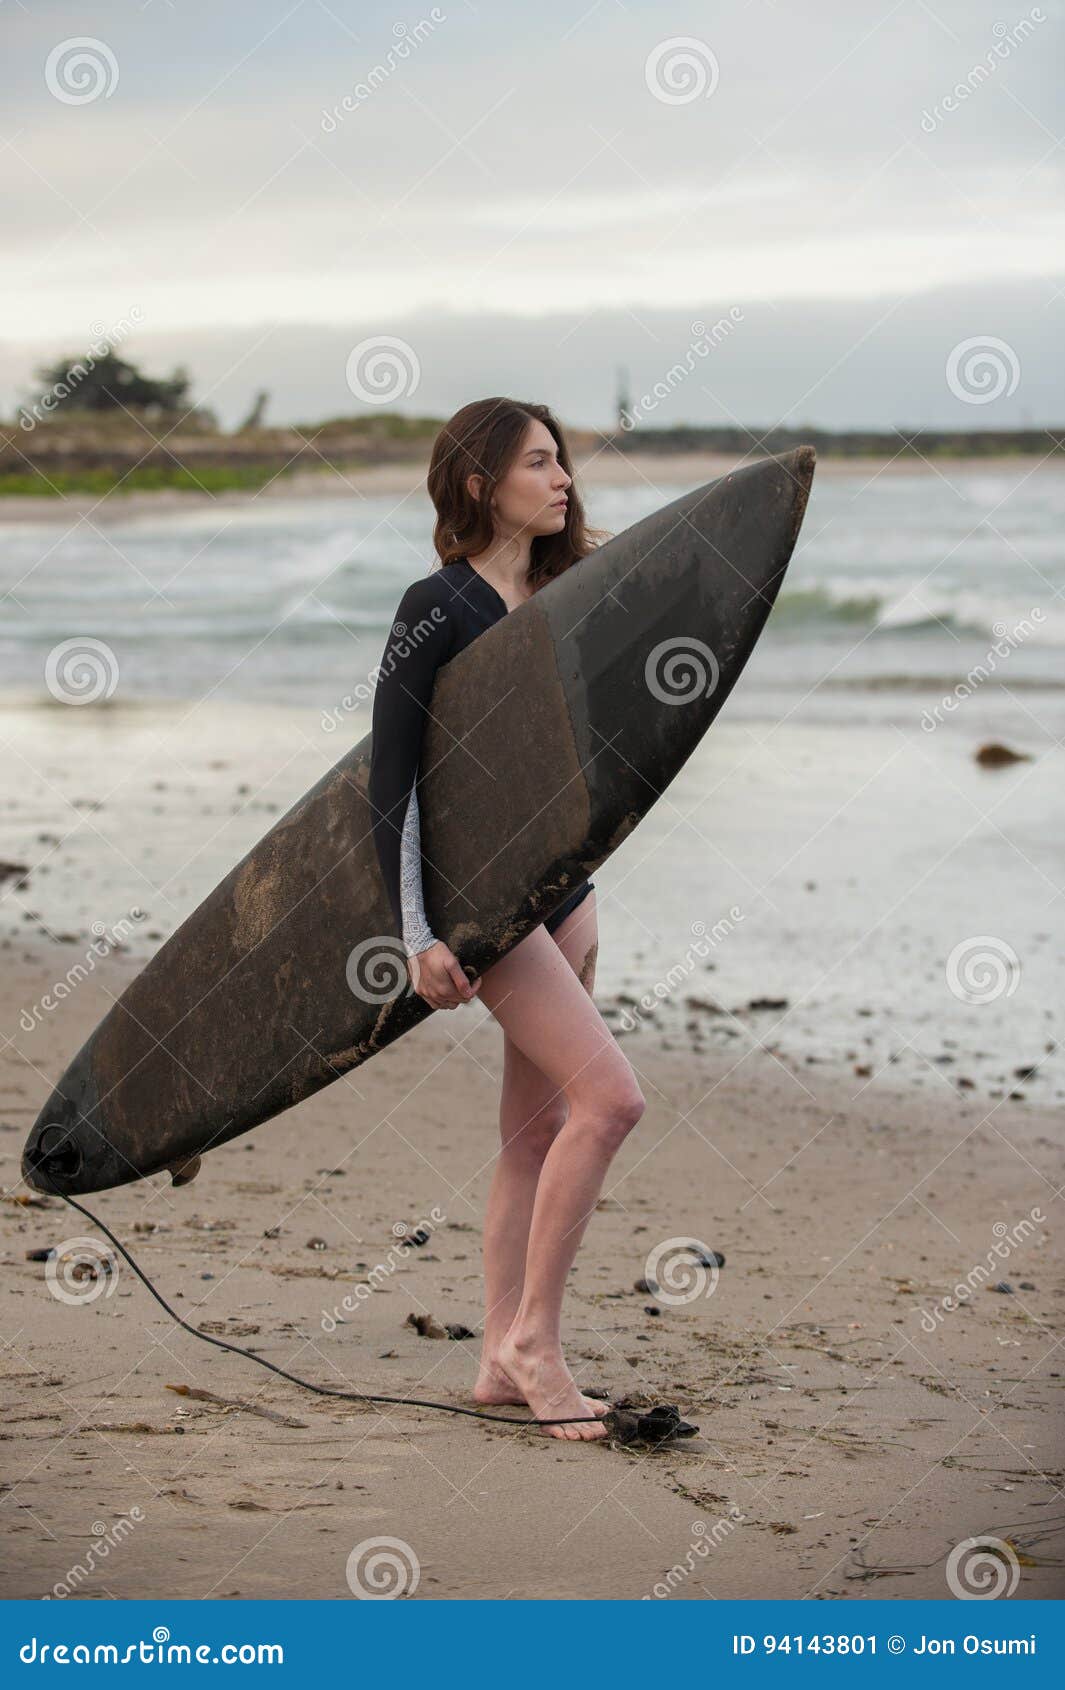 Female Surf Girl Looking At Small Waves Stock Image Image Of Sultry